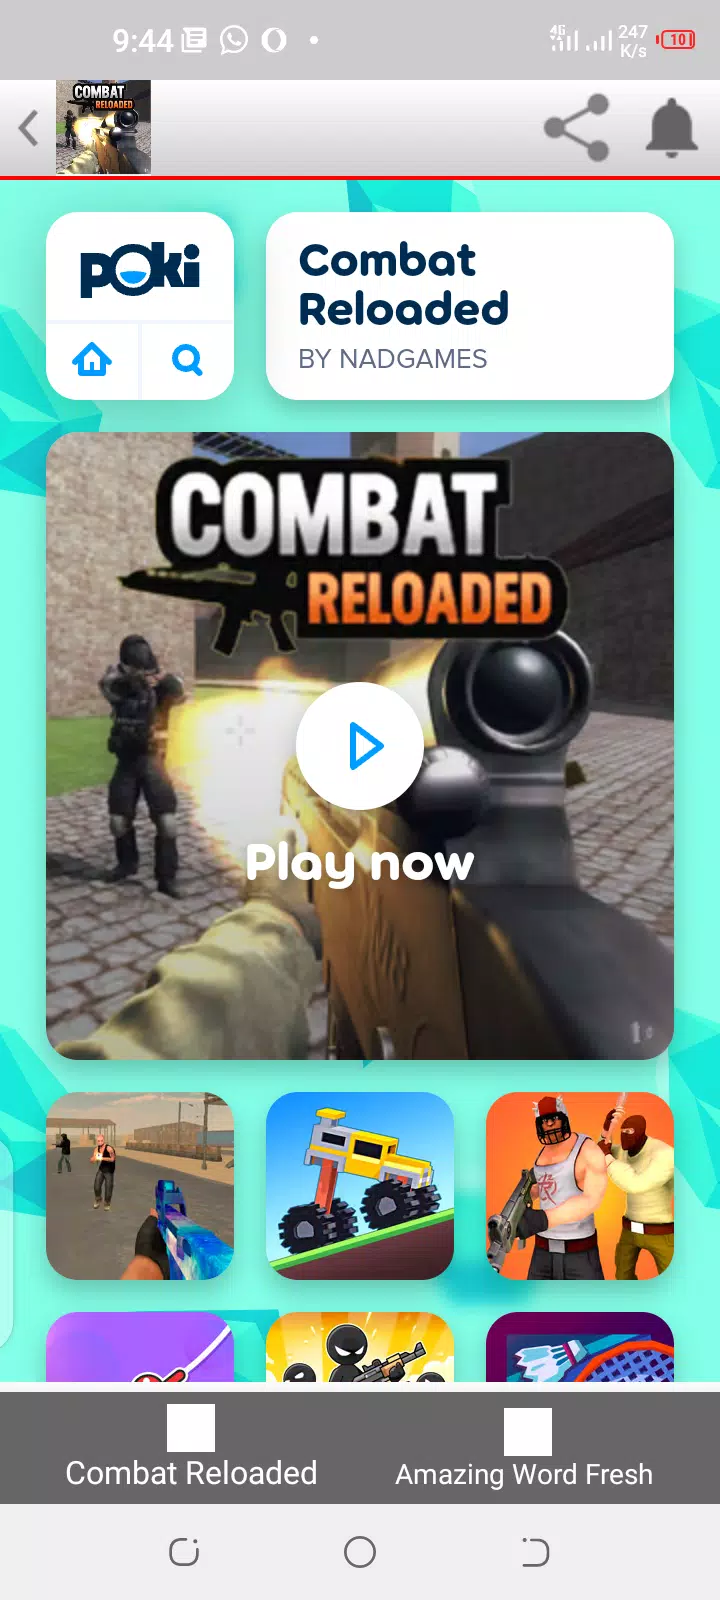 COMBAT RELOADED 2 - Play Online for Free!